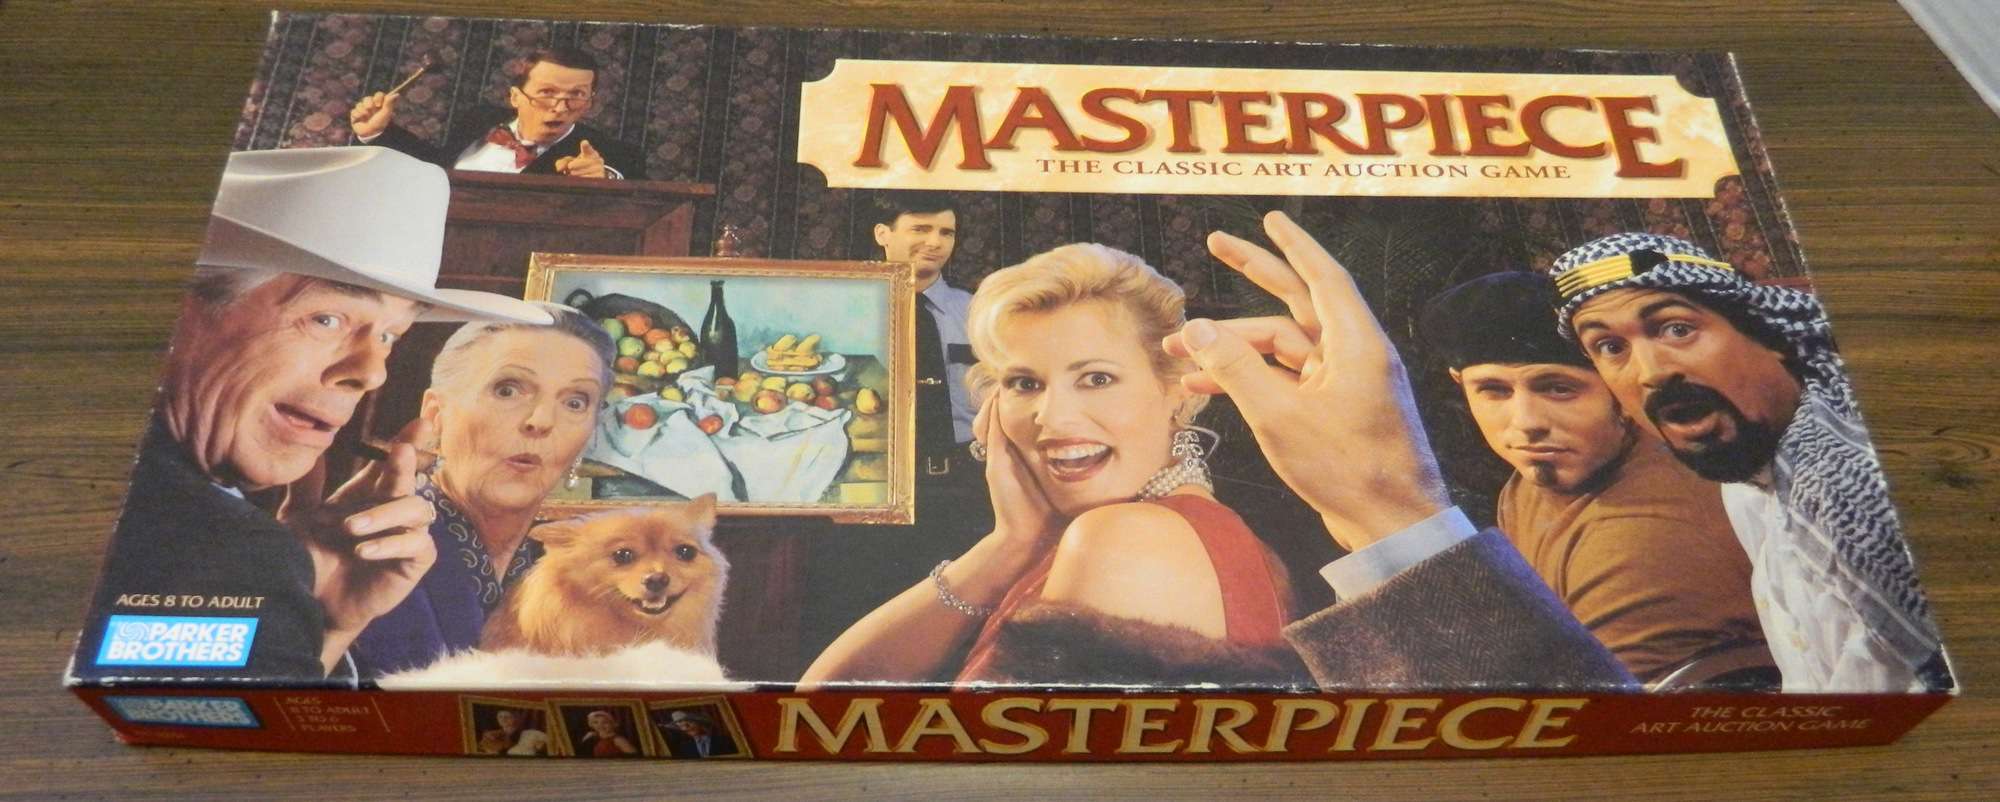 Box for Masterpiece